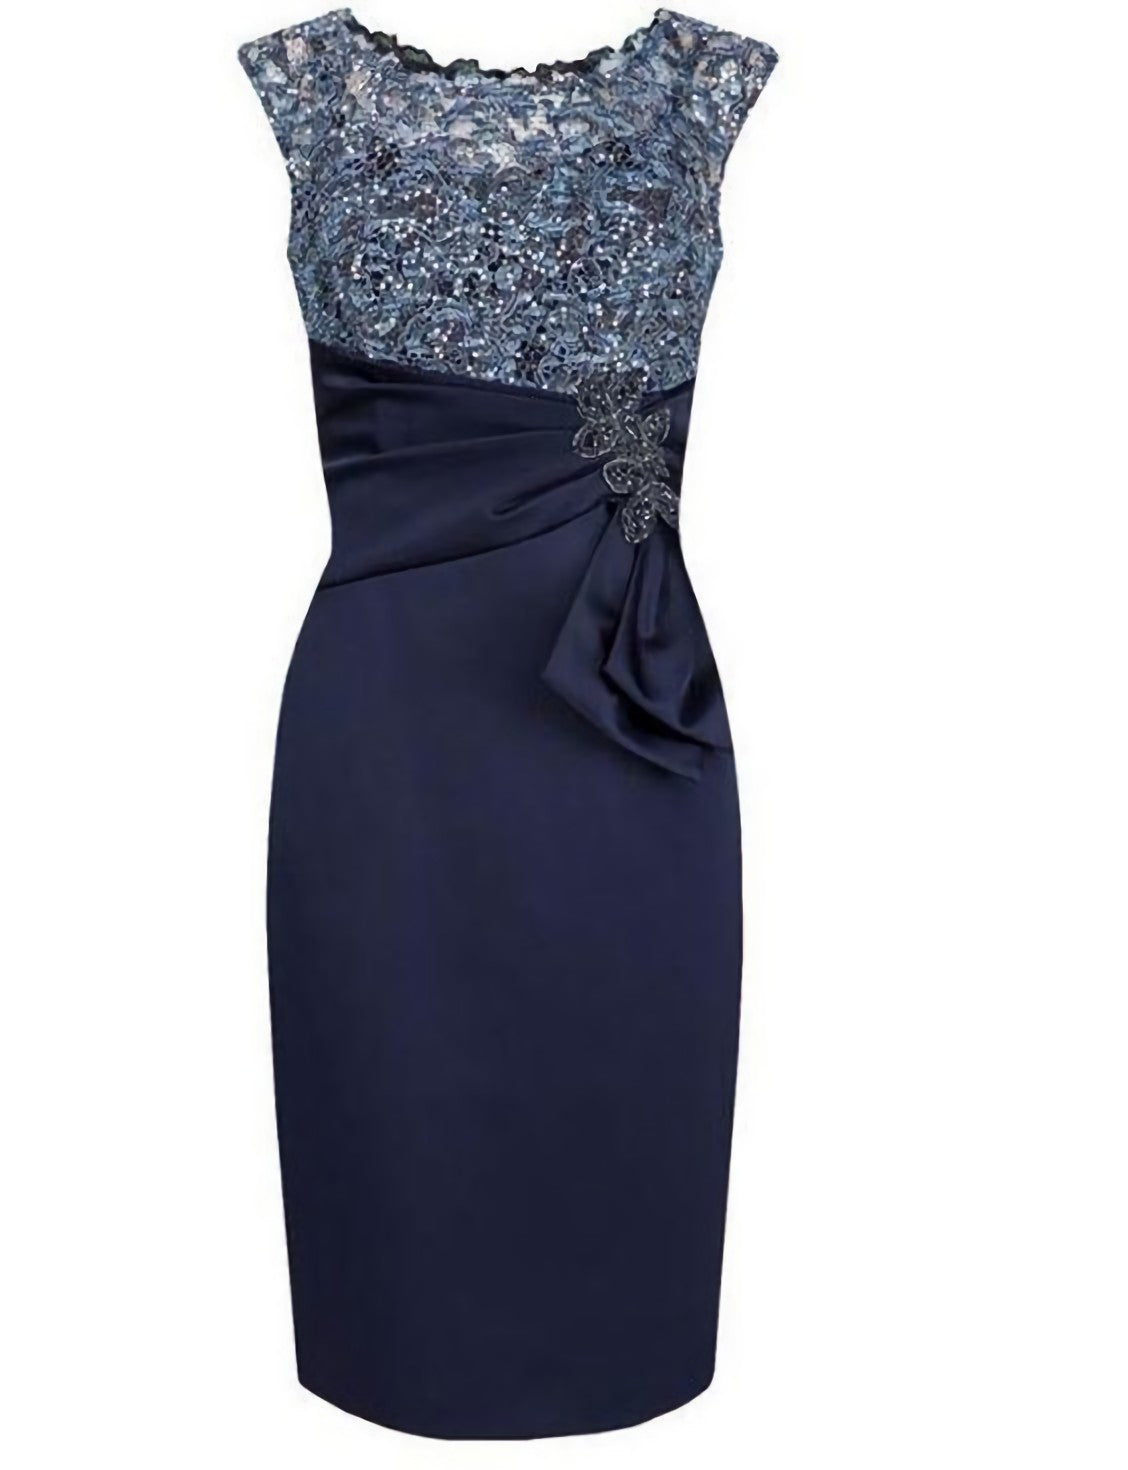 Evening Dresses 3 10 Sleeve, Navy Blue Mother Of The Bride Dresses, With Lace Prom Dress